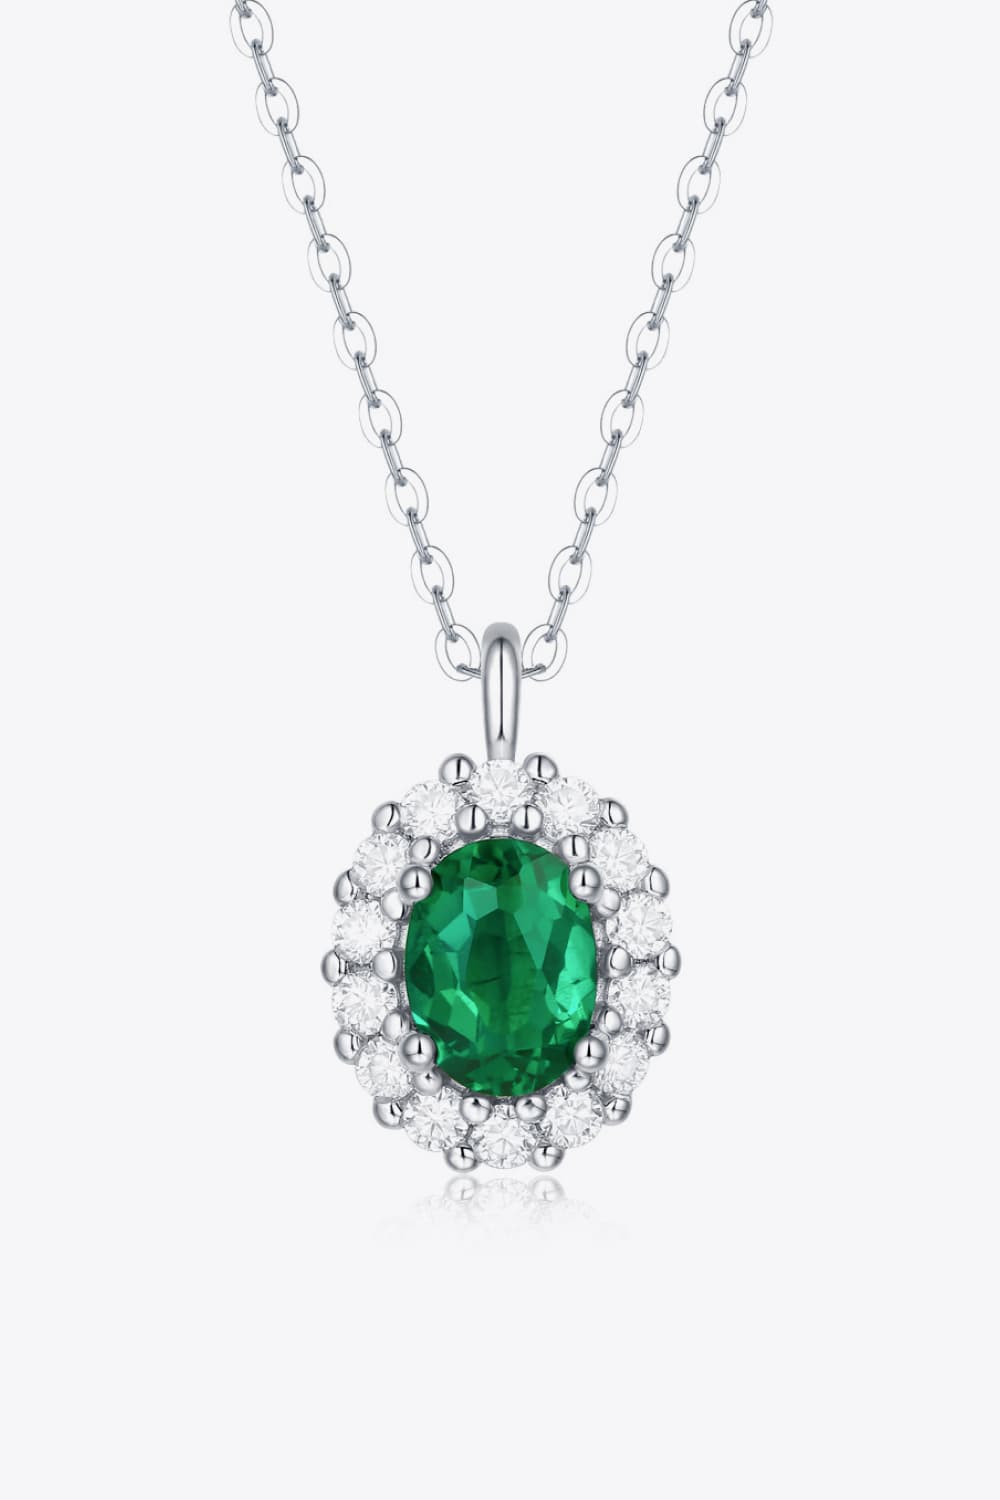 1.5 Carat Lab-Grown Emerald Oval shaped Necklace